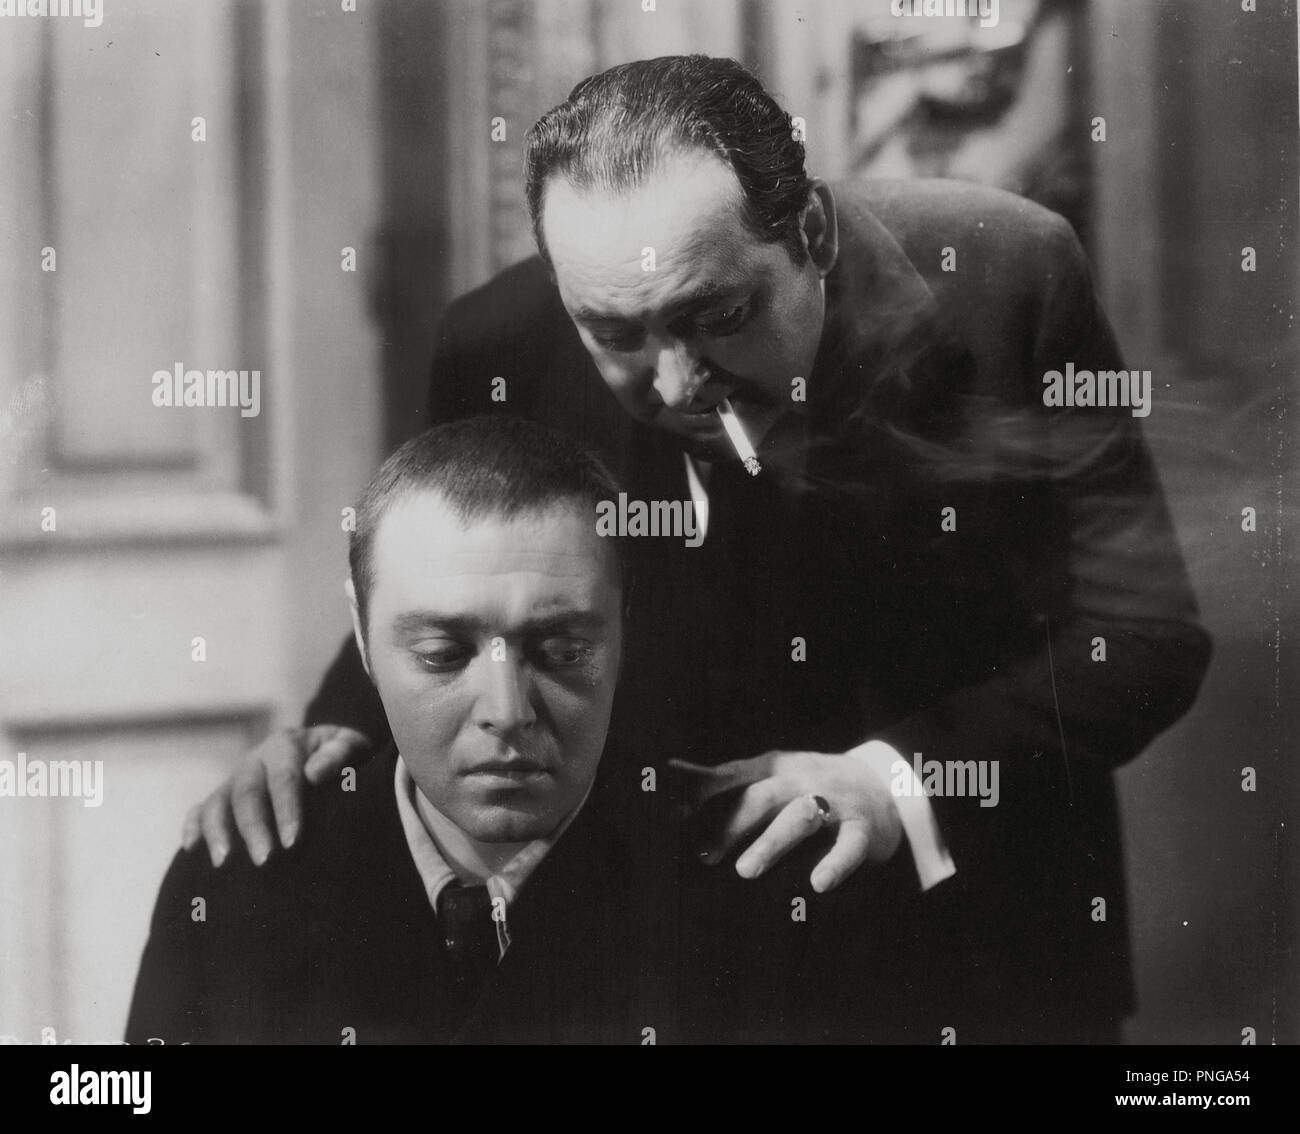 Page 3 Crime Film Still High Resolution Stock Photography And Images Alamy